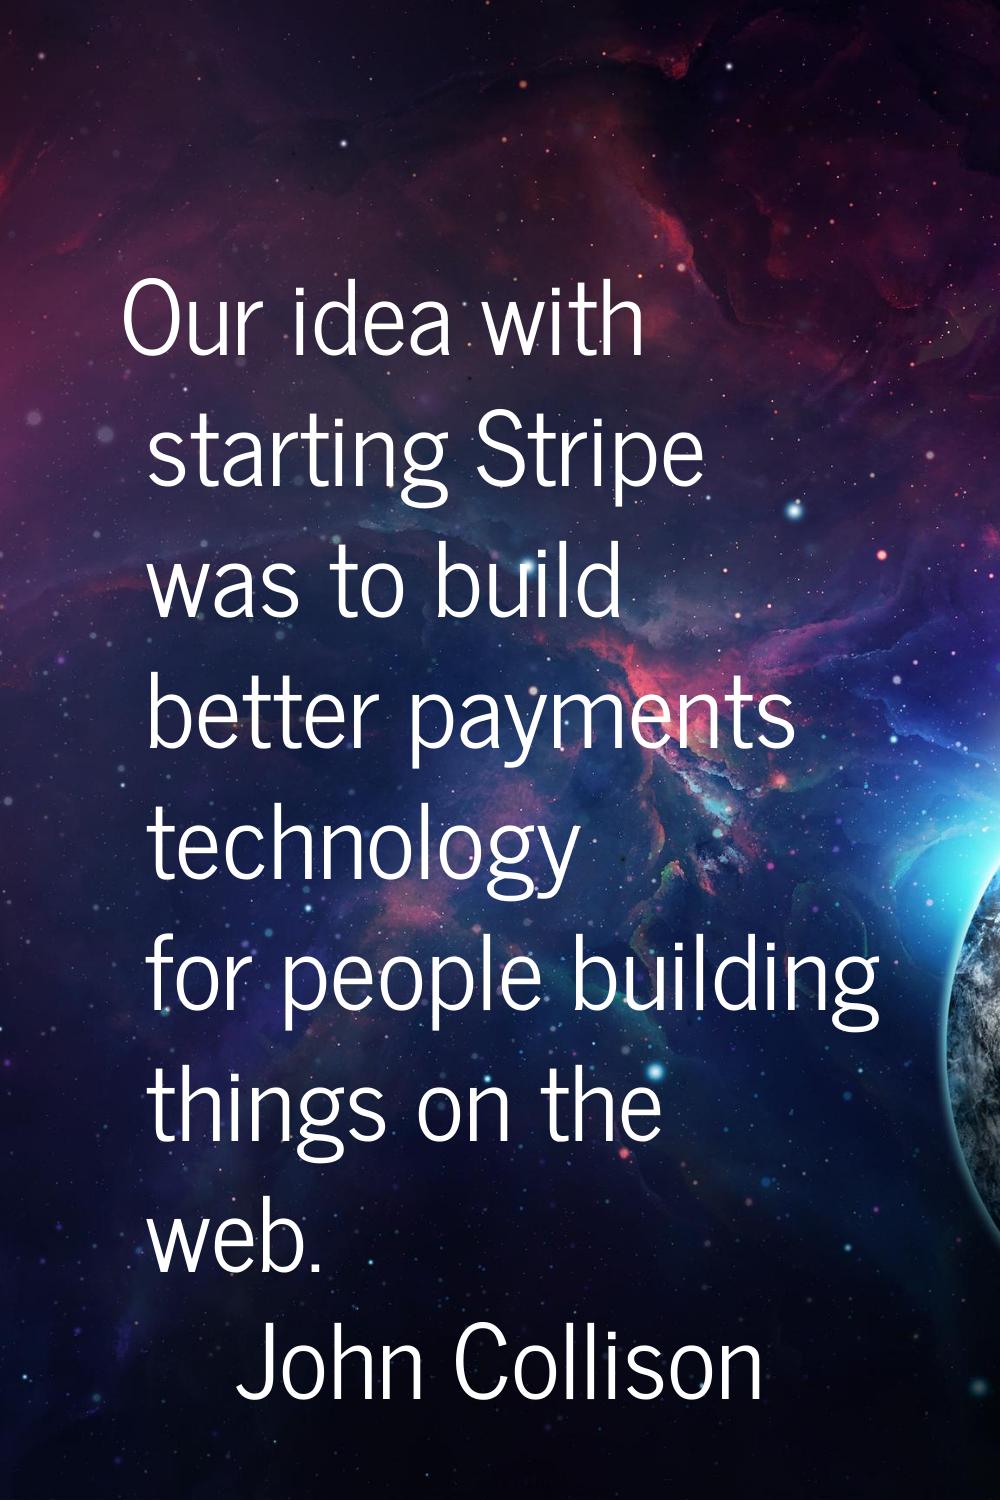 Our idea with starting Stripe was to build better payments technology for people building things on